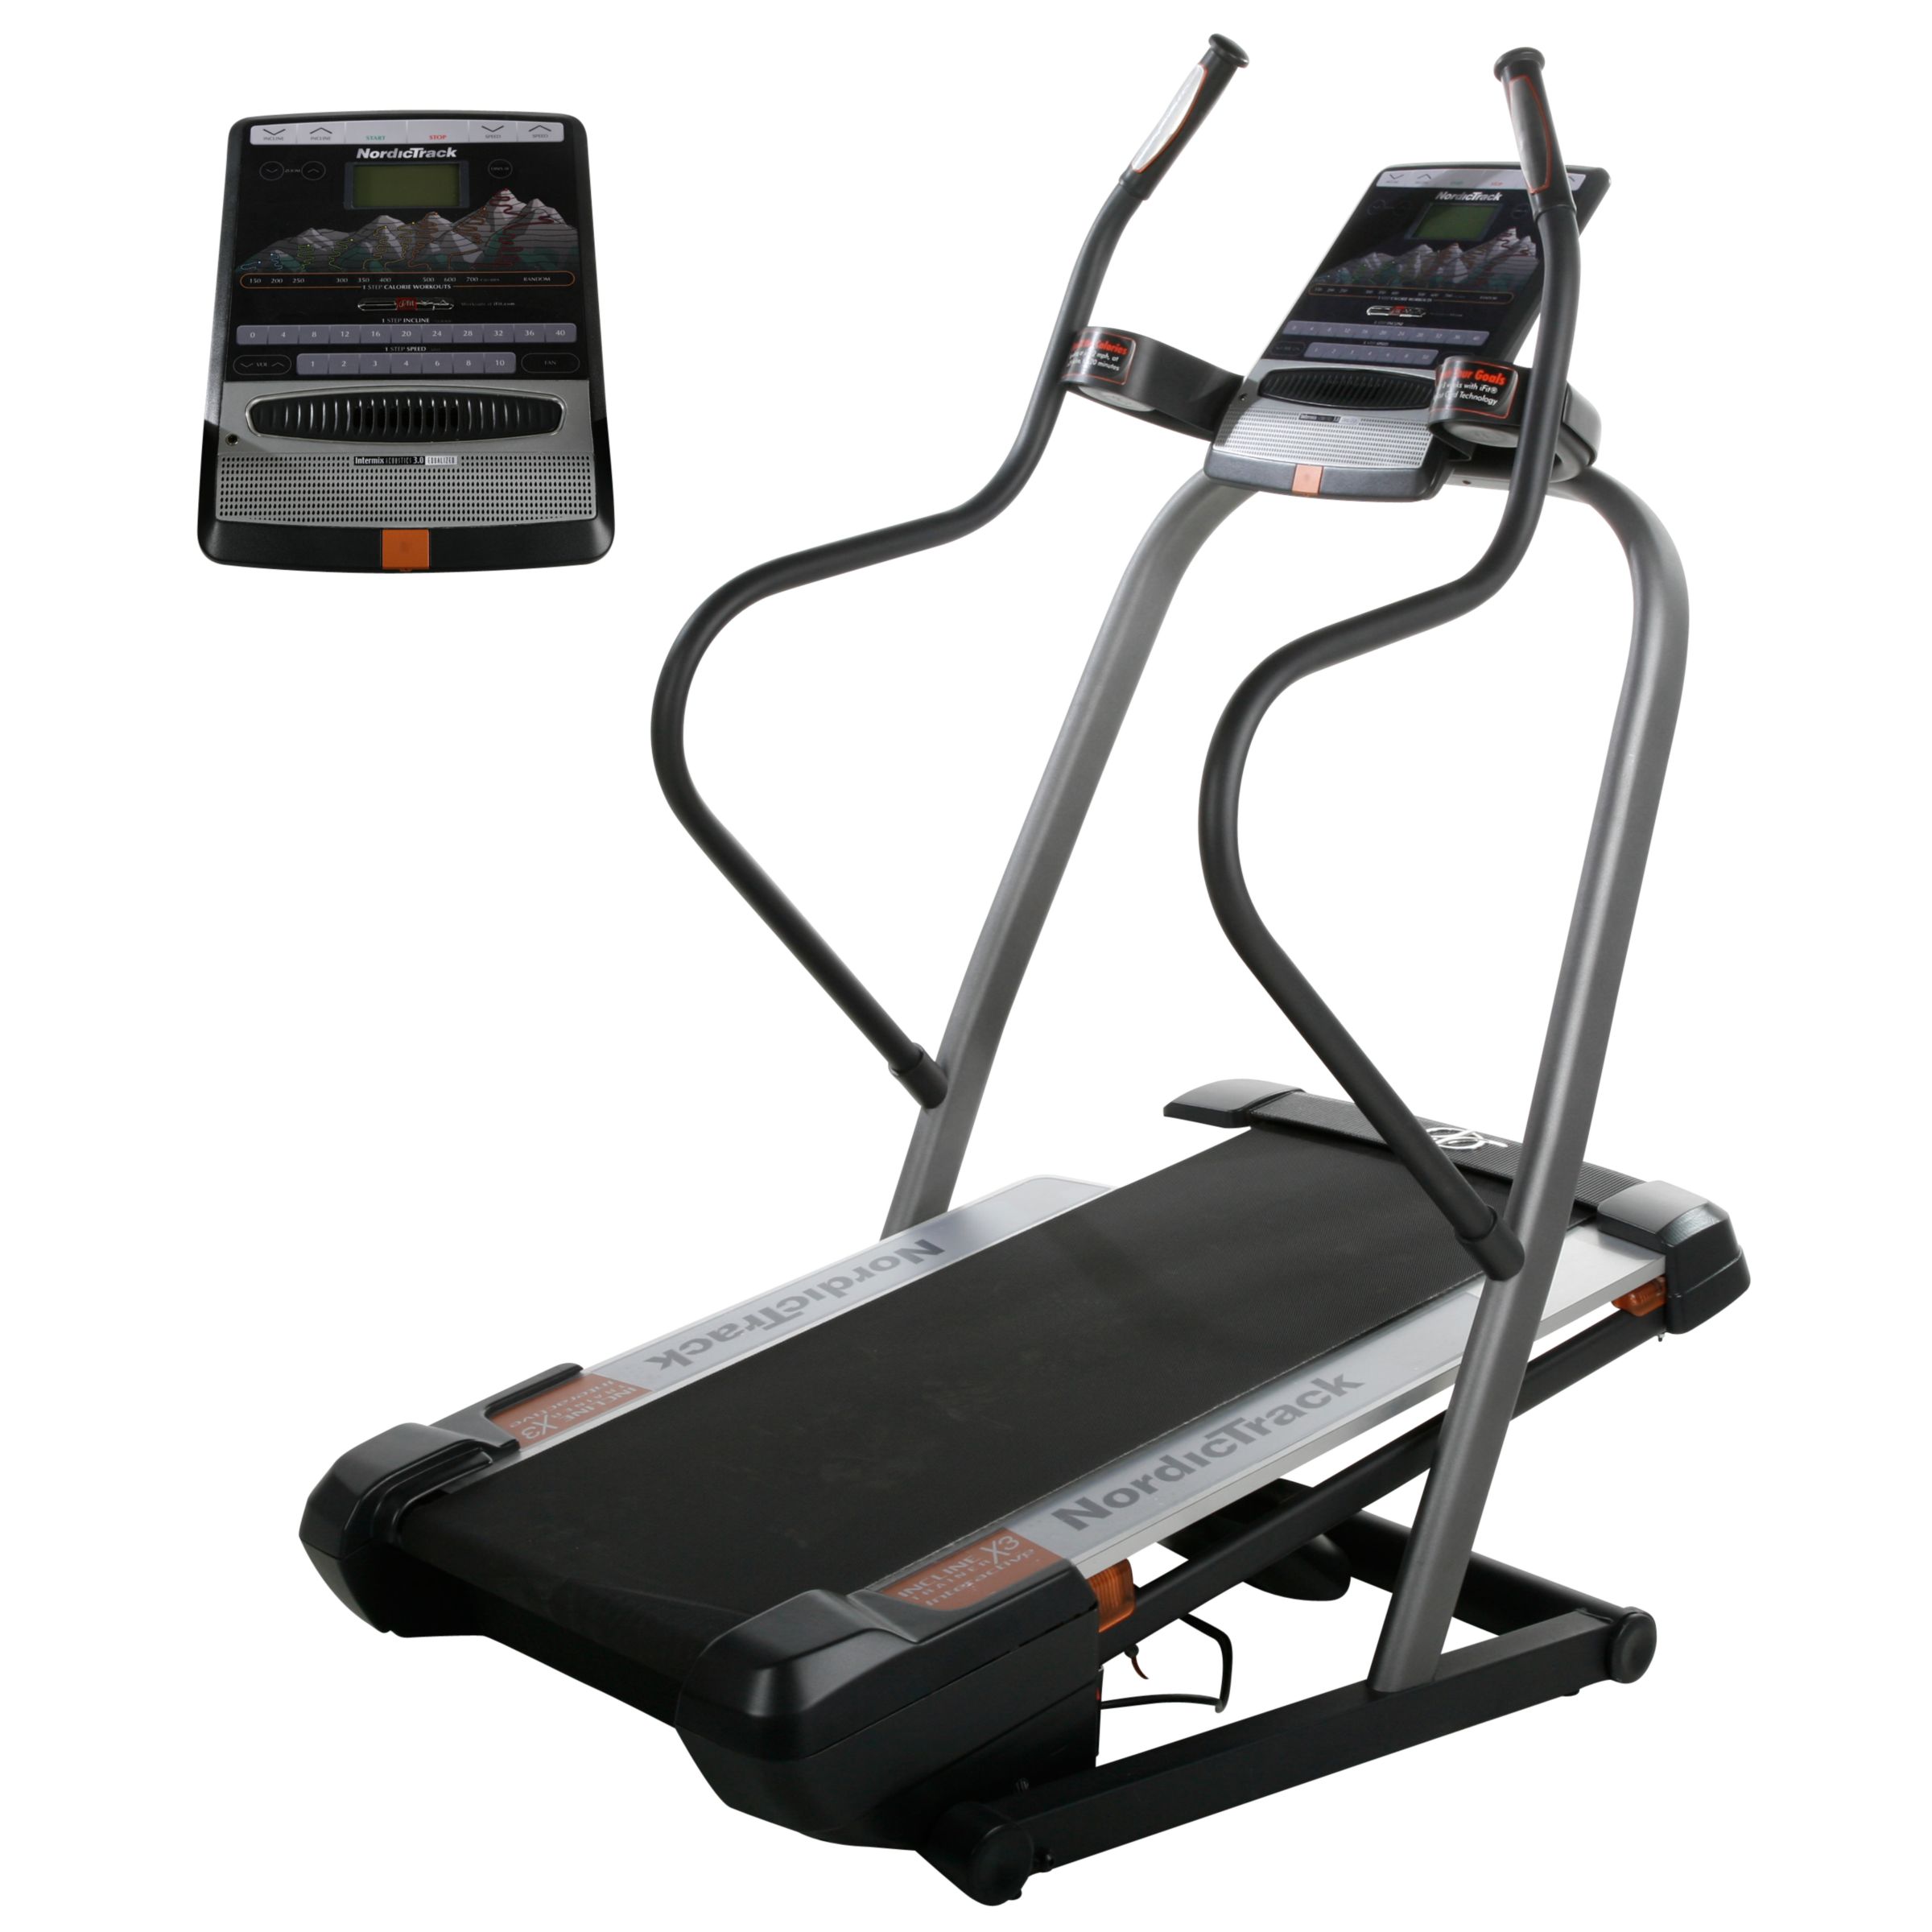 Nordic Track X3 Incline Trainer at John Lewis